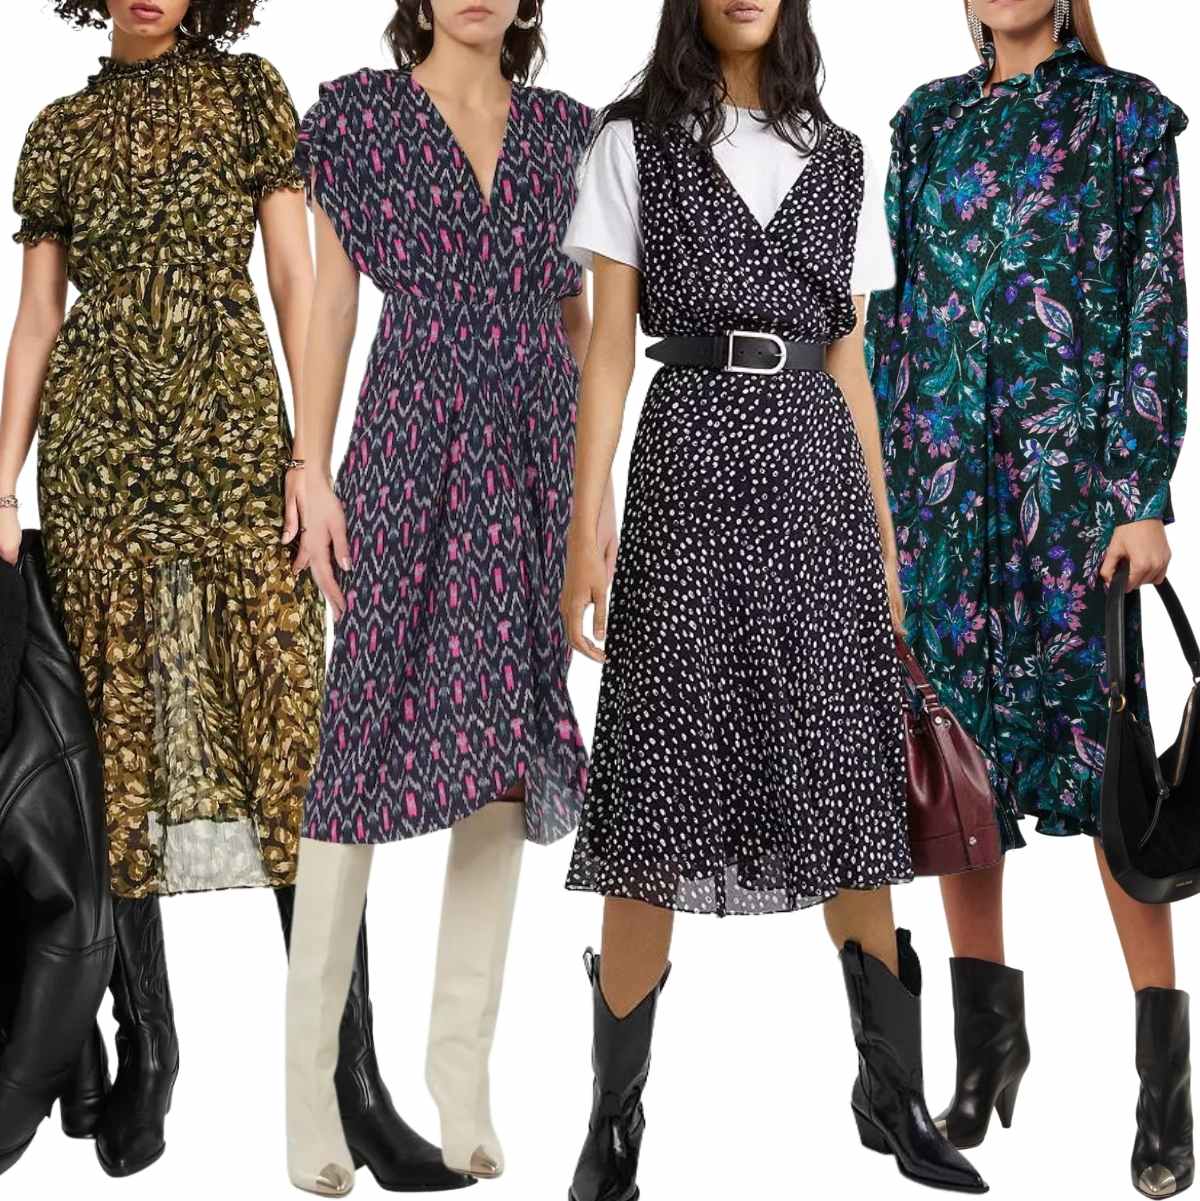 Collage of 5 women wearing different midi dresses with cowboy boots.